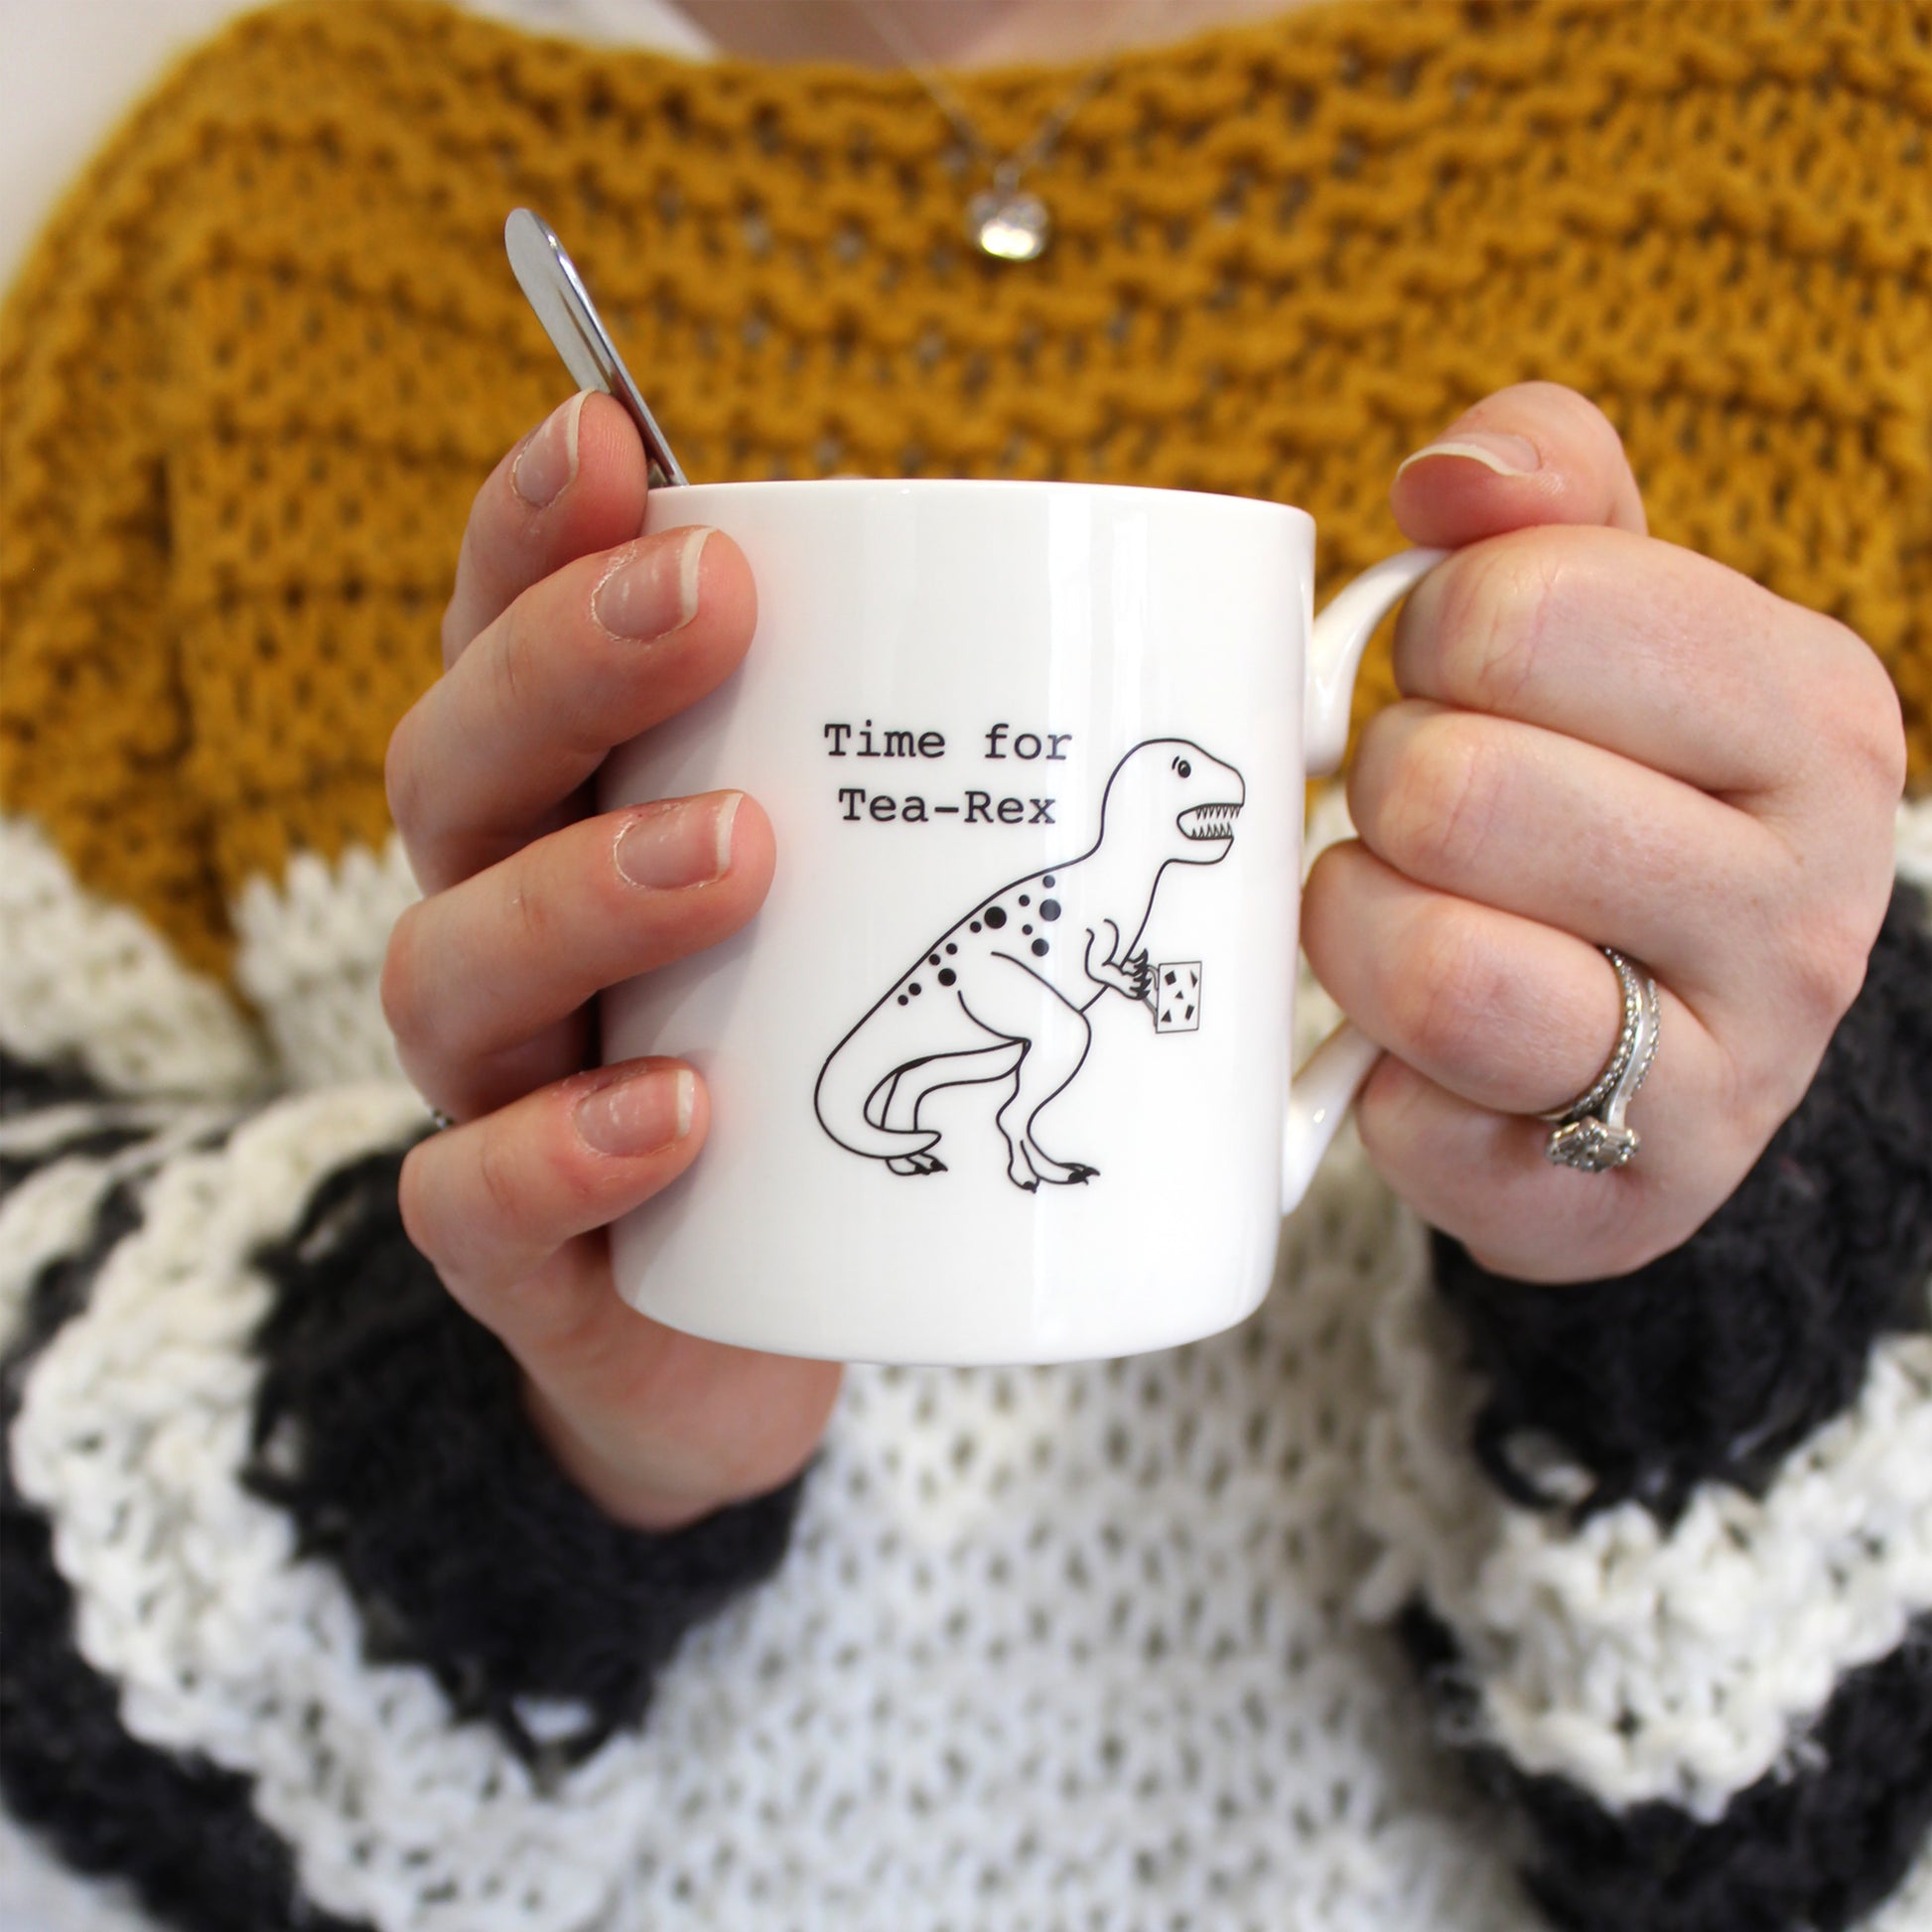 Time for Tea-Rex Mug being held by a person in a mustard, white and grey chunky knit jumper